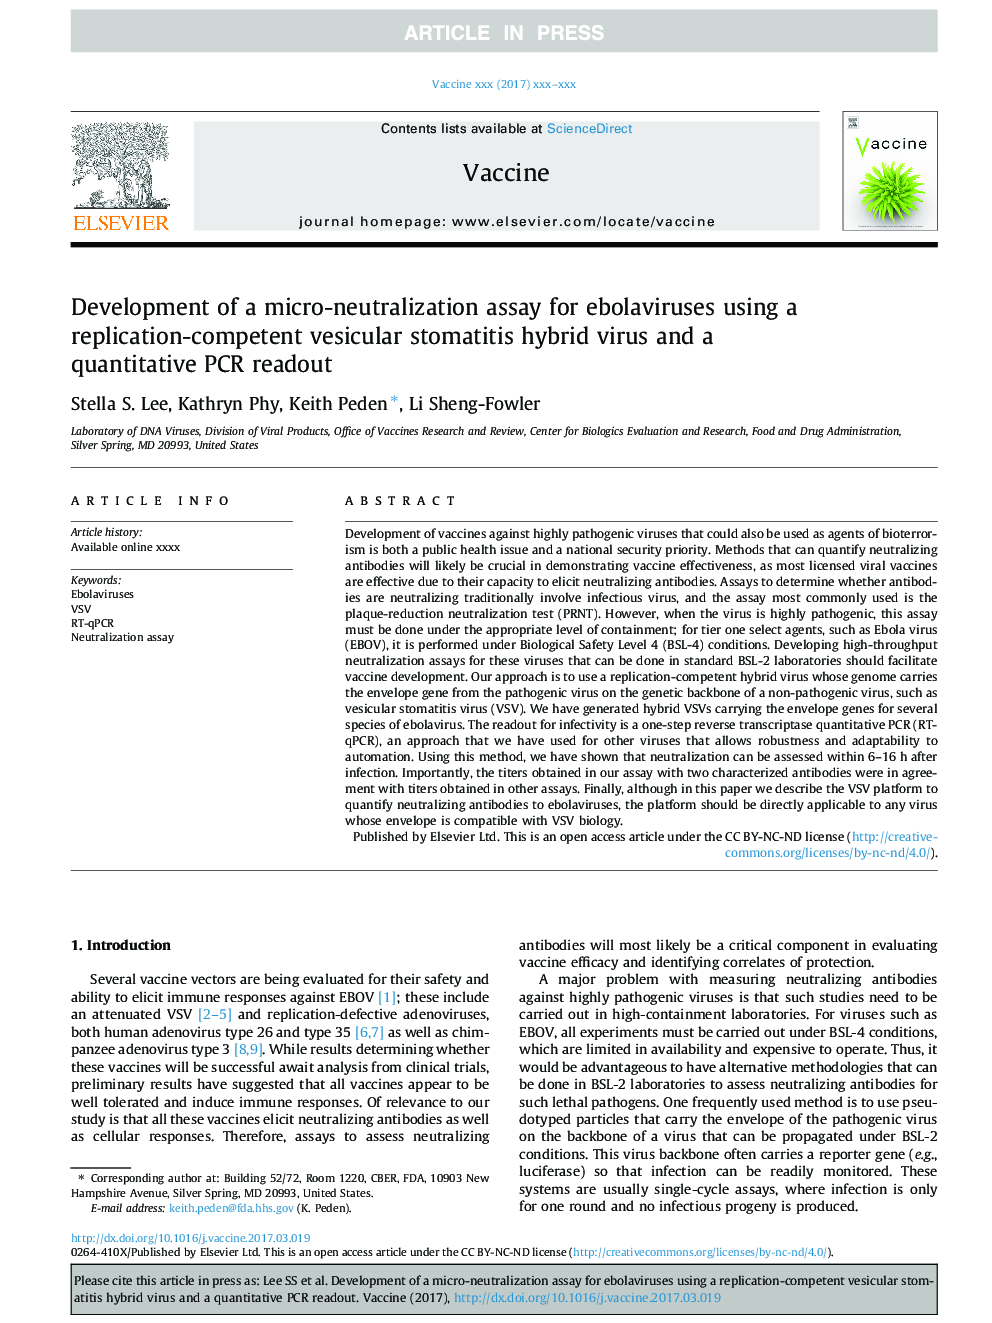 Development of a micro-neutralization assay for ebolaviruses using a replication-competent vesicular stomatitis hybrid virus and a quantitative PCR readout